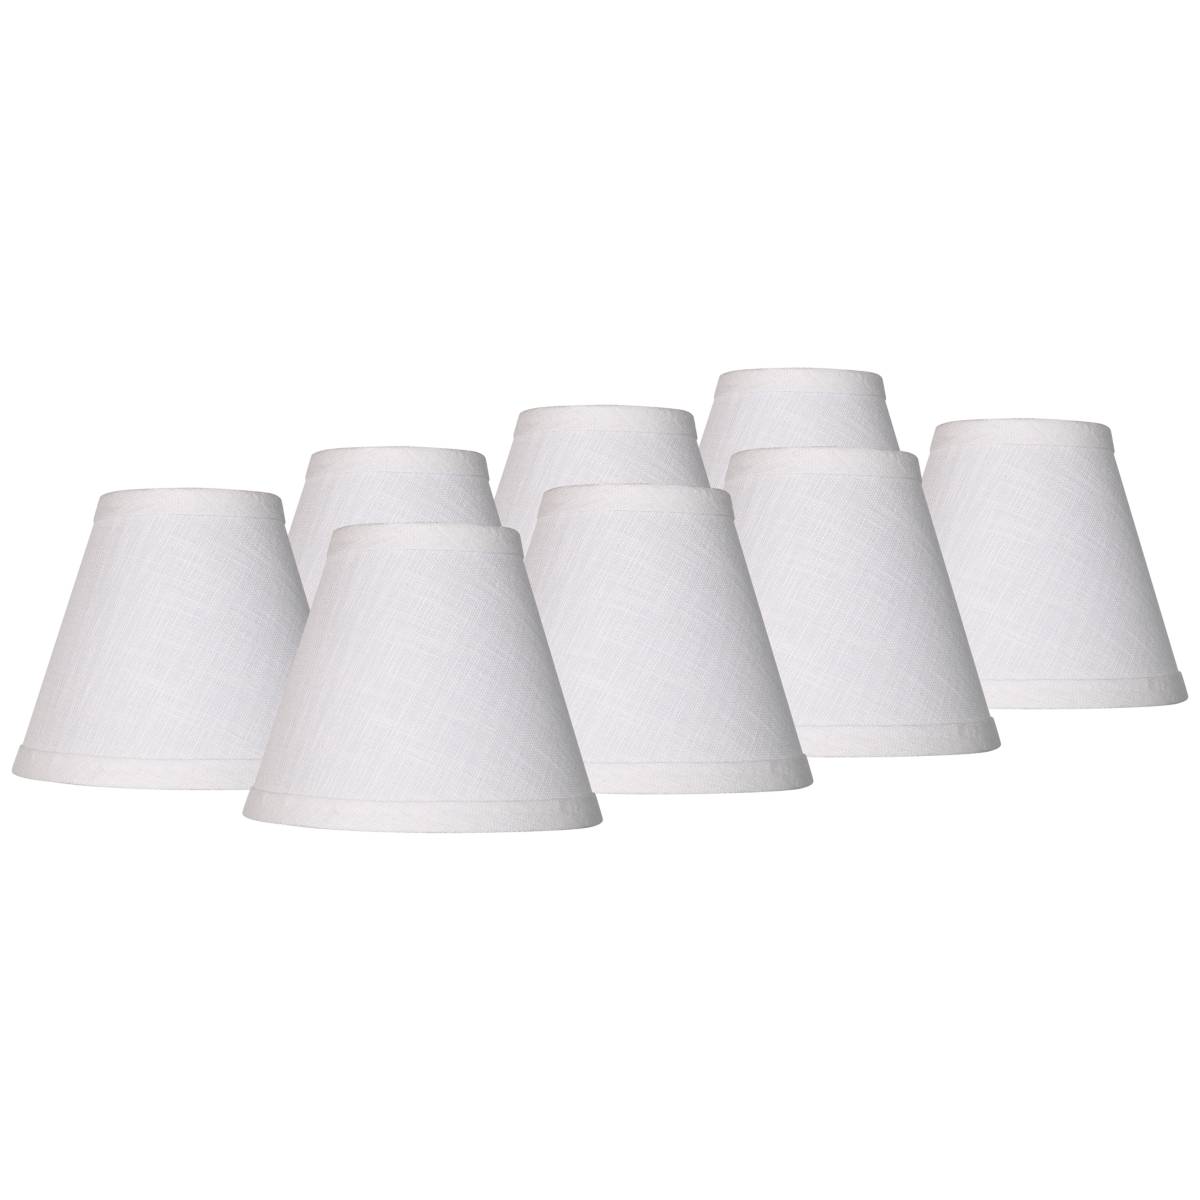 Clip on Wall Light Lam Shade Bell Fabric Chandelier Lampshade 7 Colours 